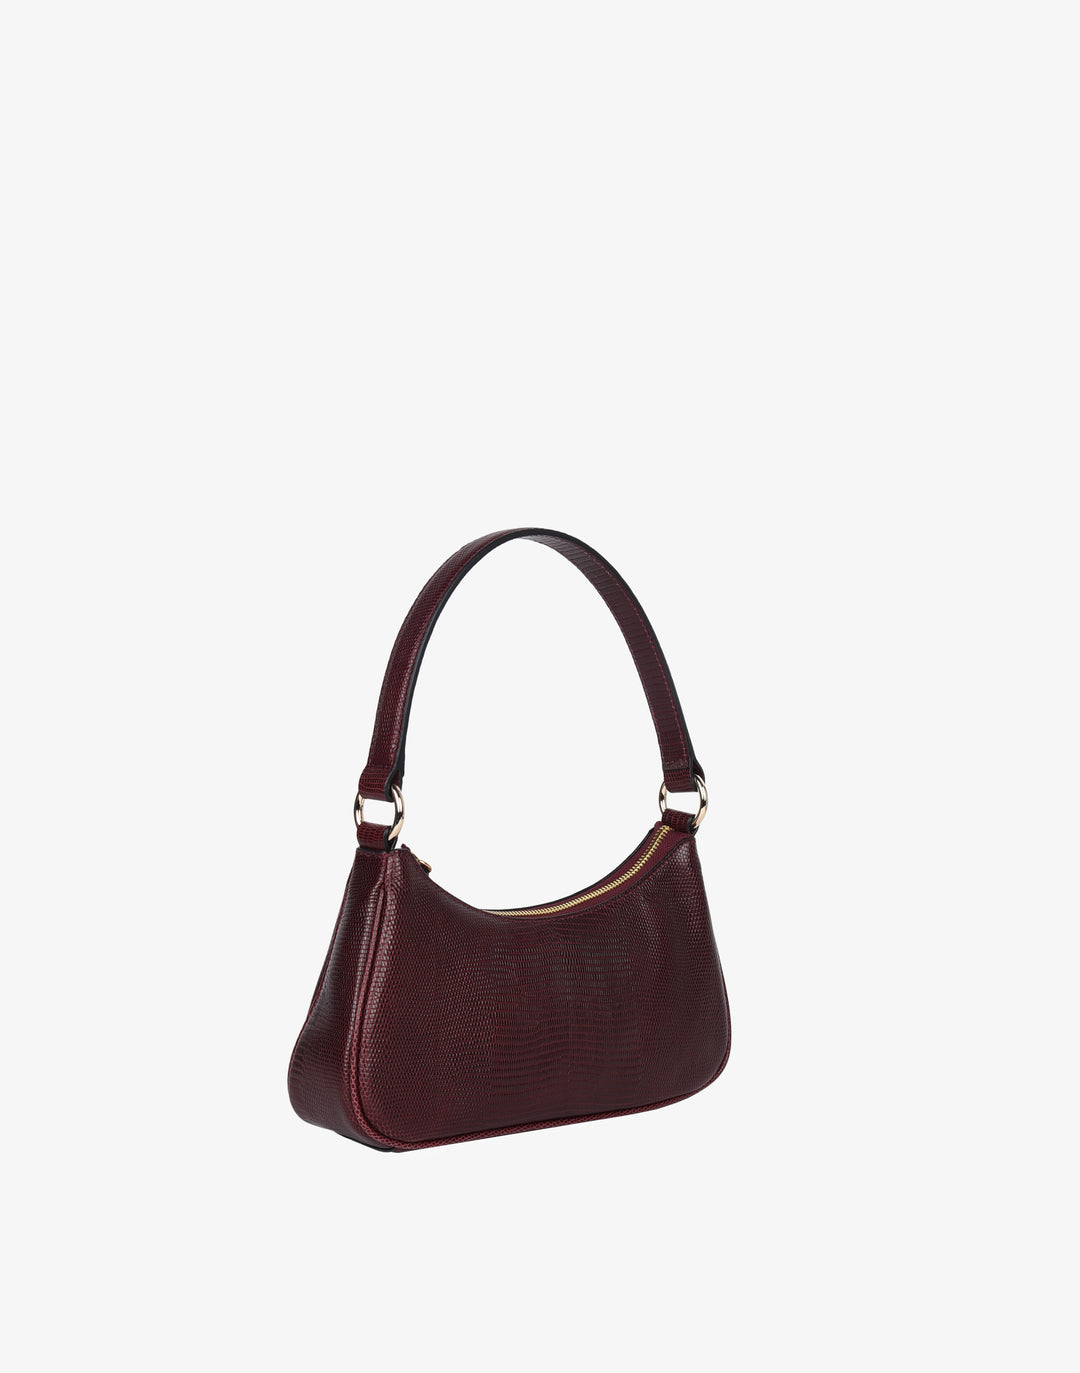 Lovely lindy 🩶🥰 Elegant tones in the cutest bag of all!❣️ Don